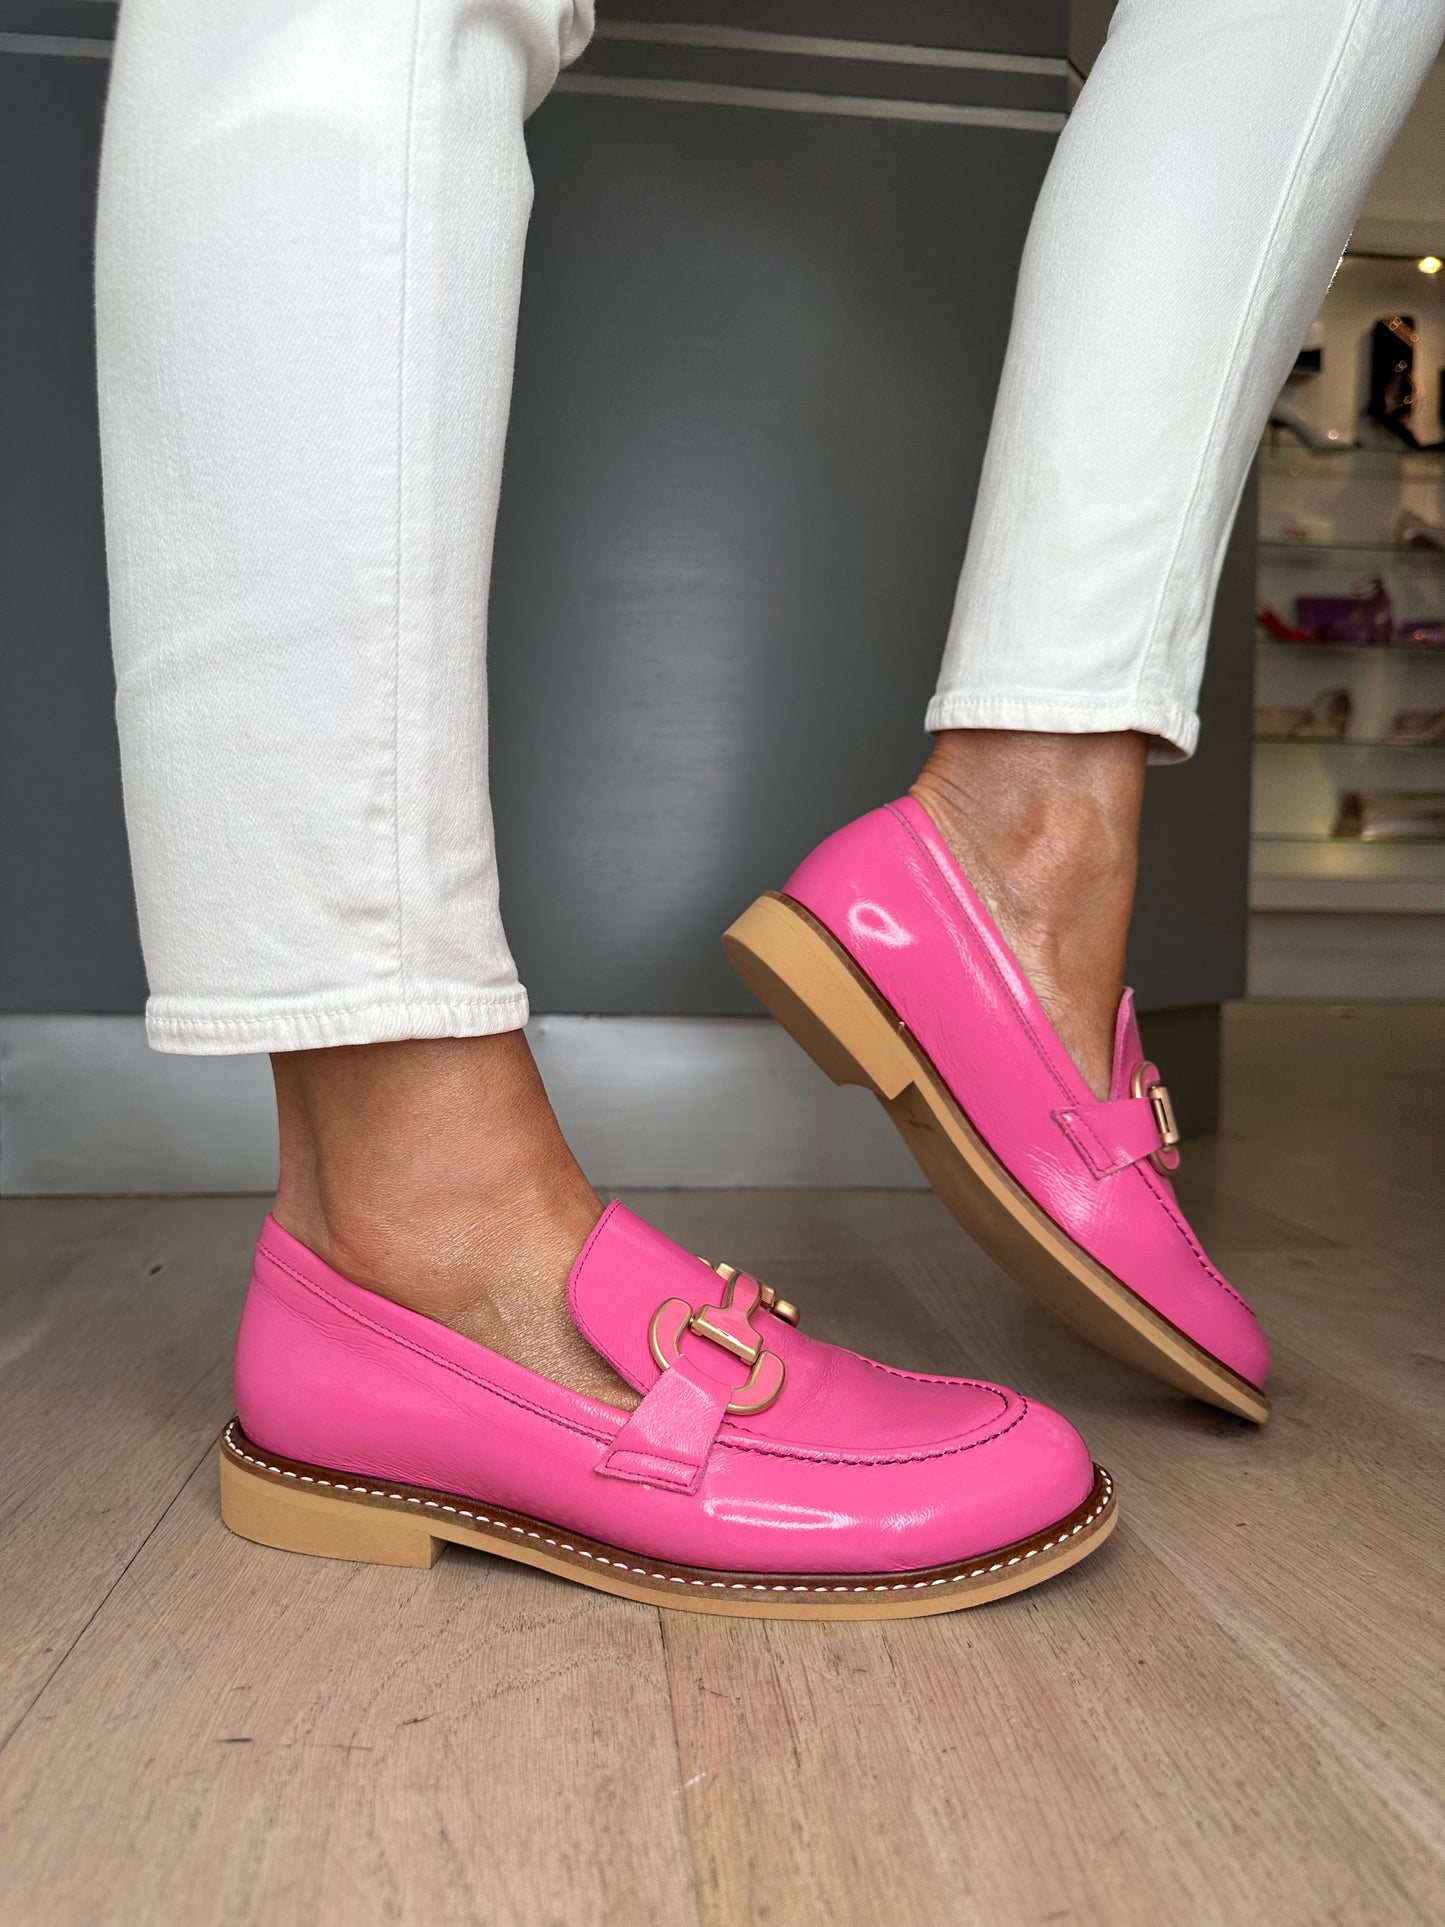 Marian - Hot Pink Nappa Leather Loafer With Chain Trim